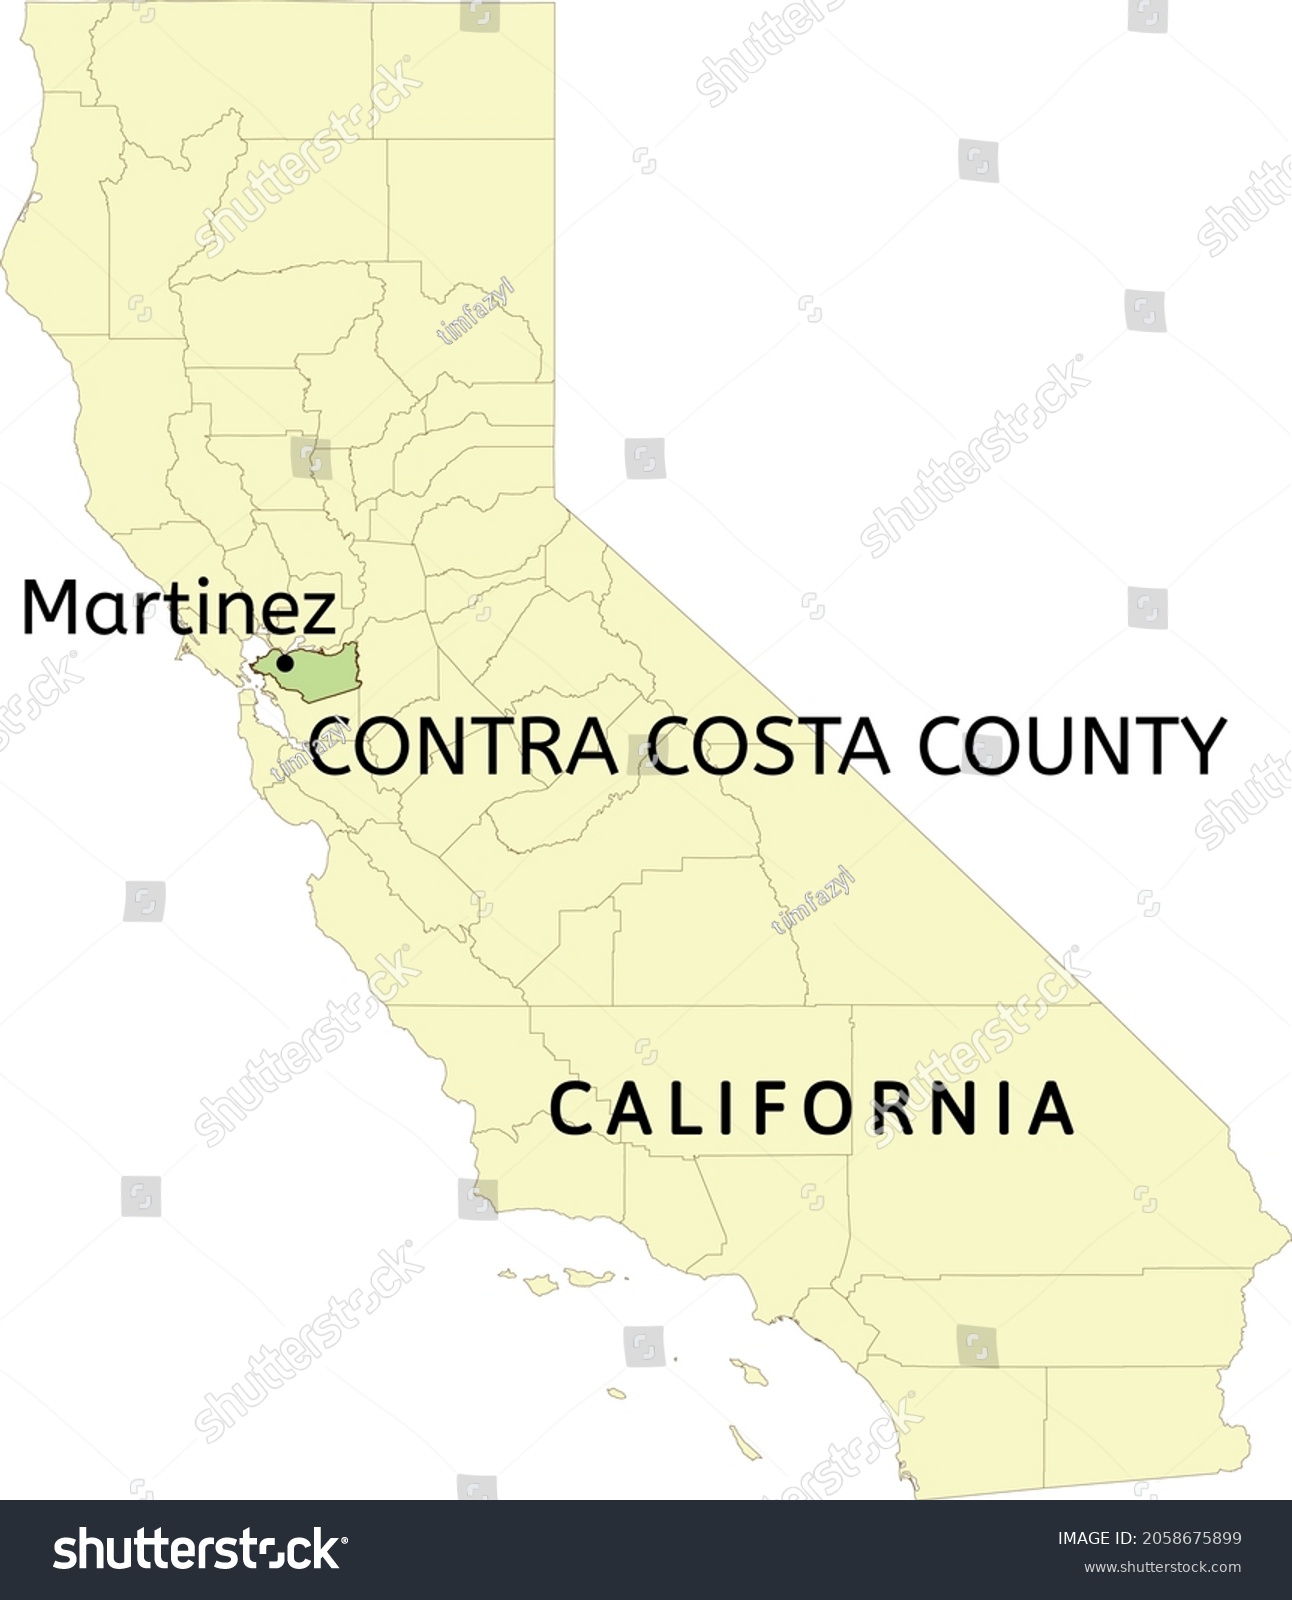 Contra Costa County and city of Martinez location on California state map #2058675899